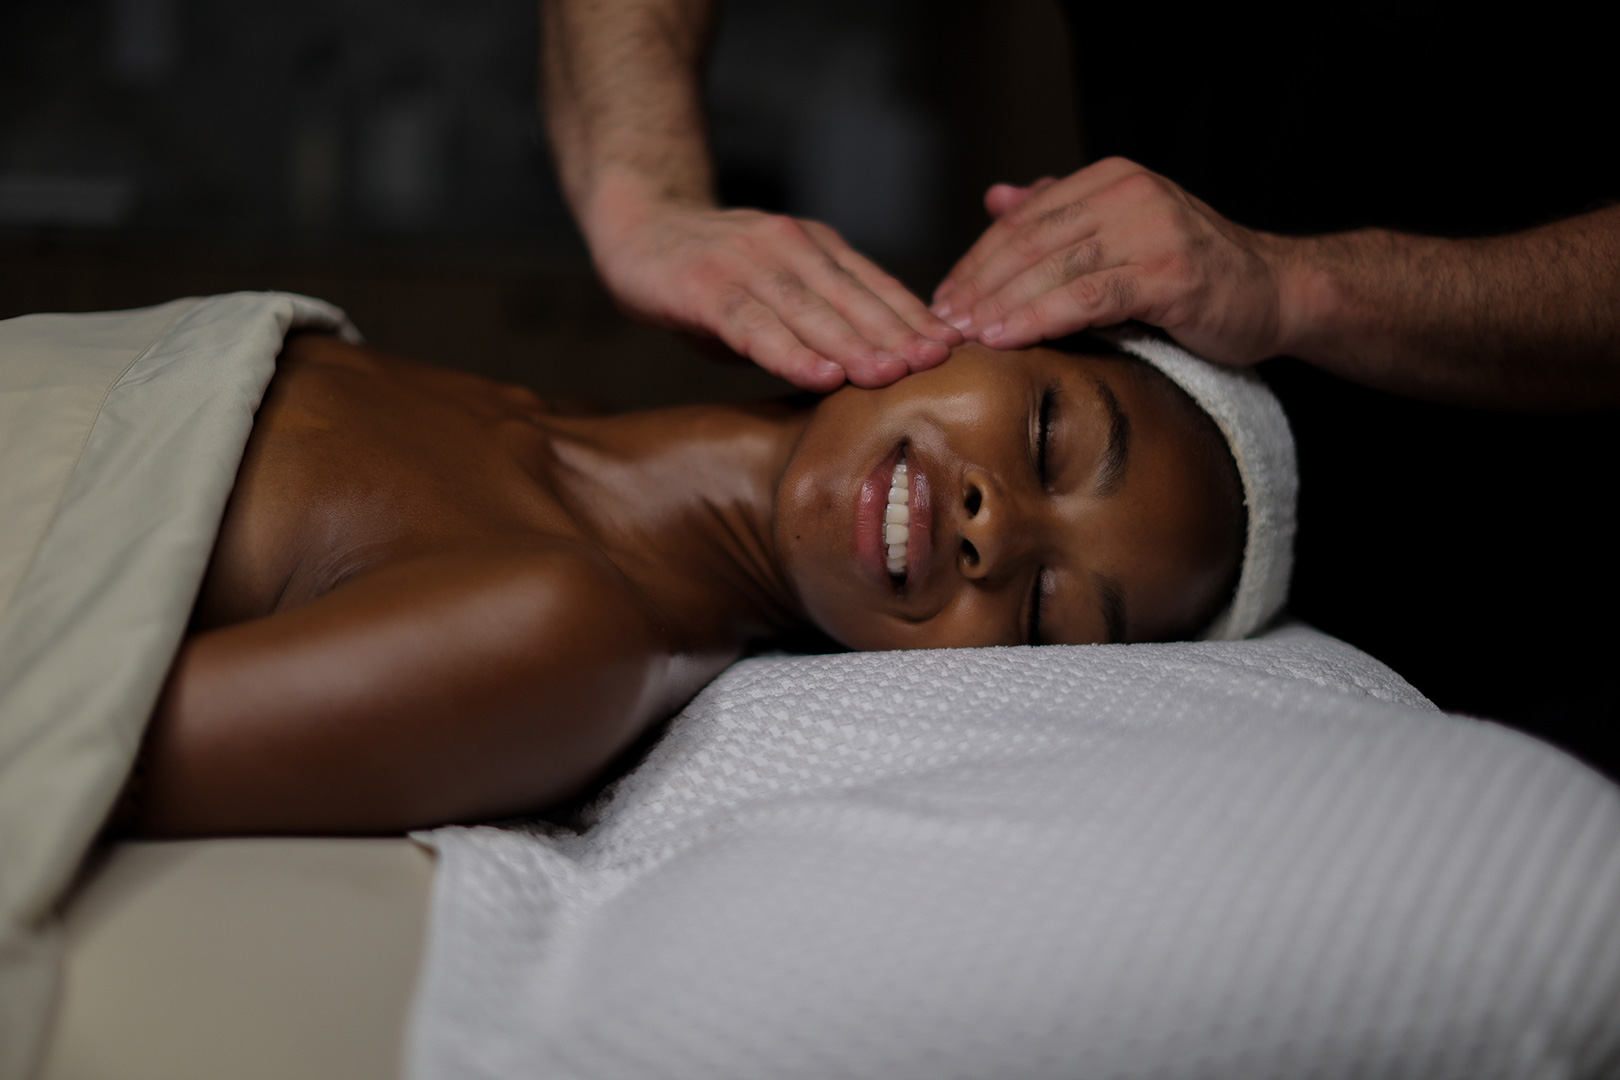 A person is lying down, appearing relaxed with a serene expression, receiving a head massage. They are draped in a white spa towel, emphasizing a calm and therapeutic setting.